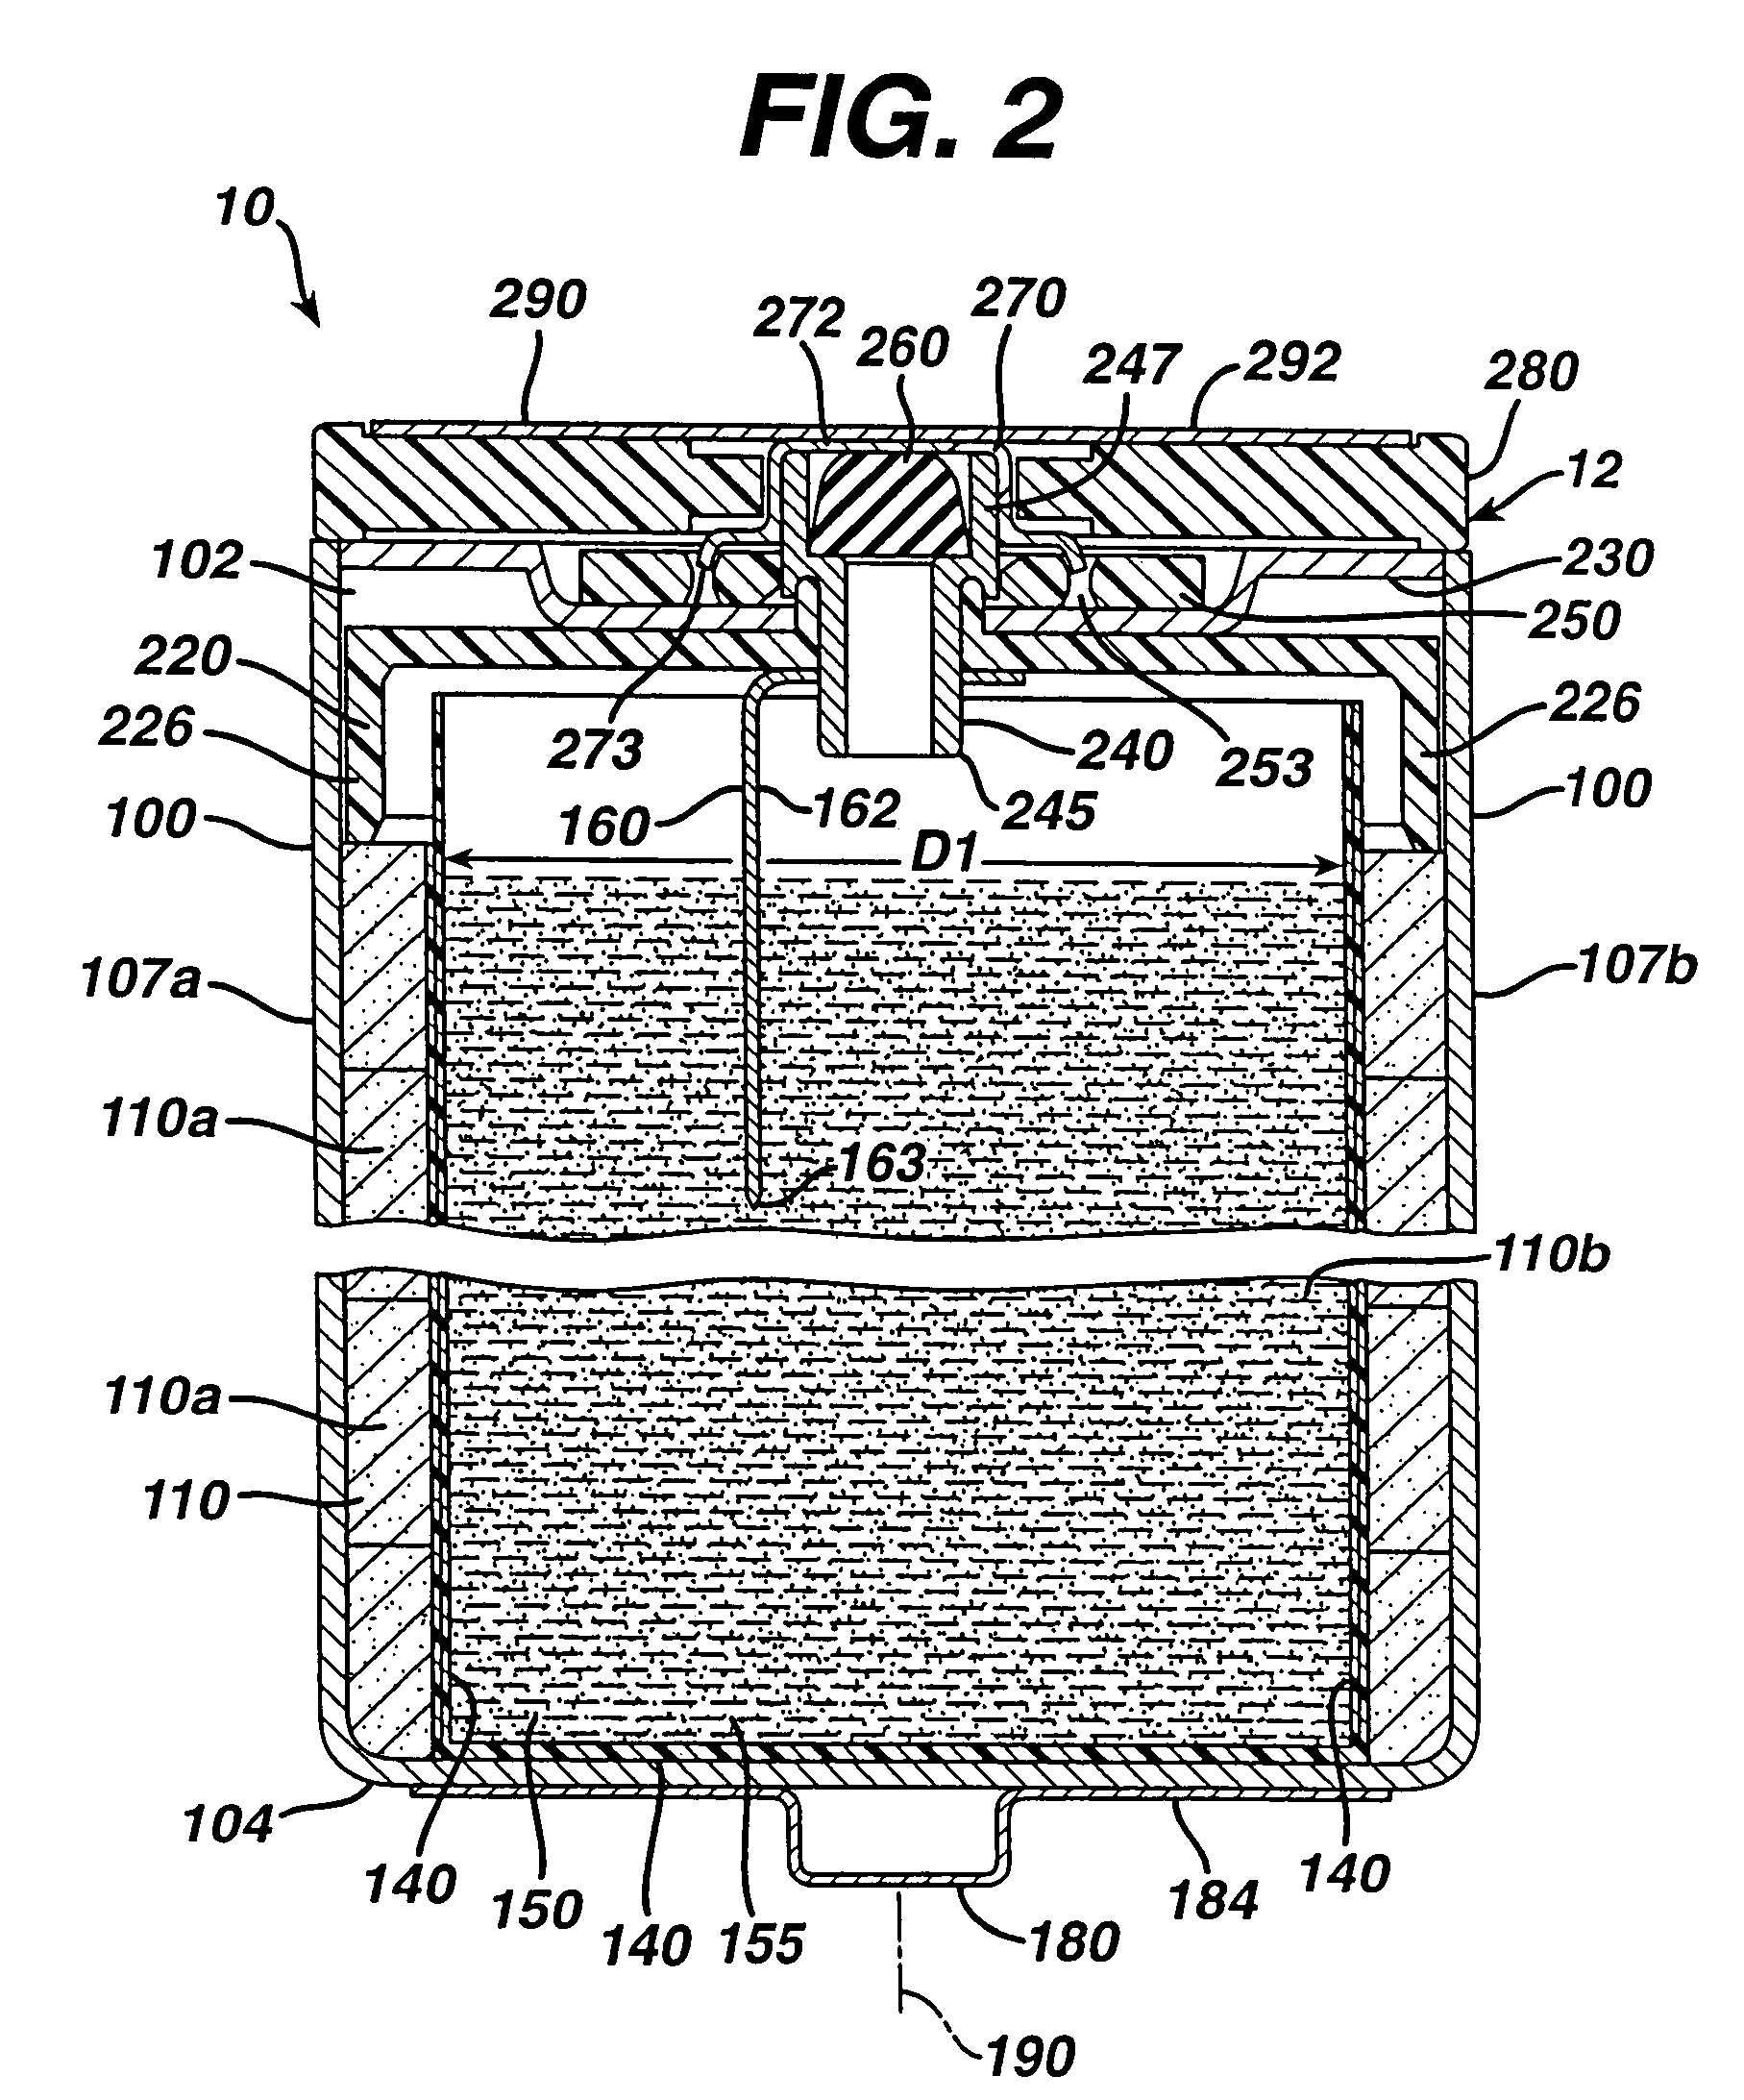 Alkaline cell with flat housing